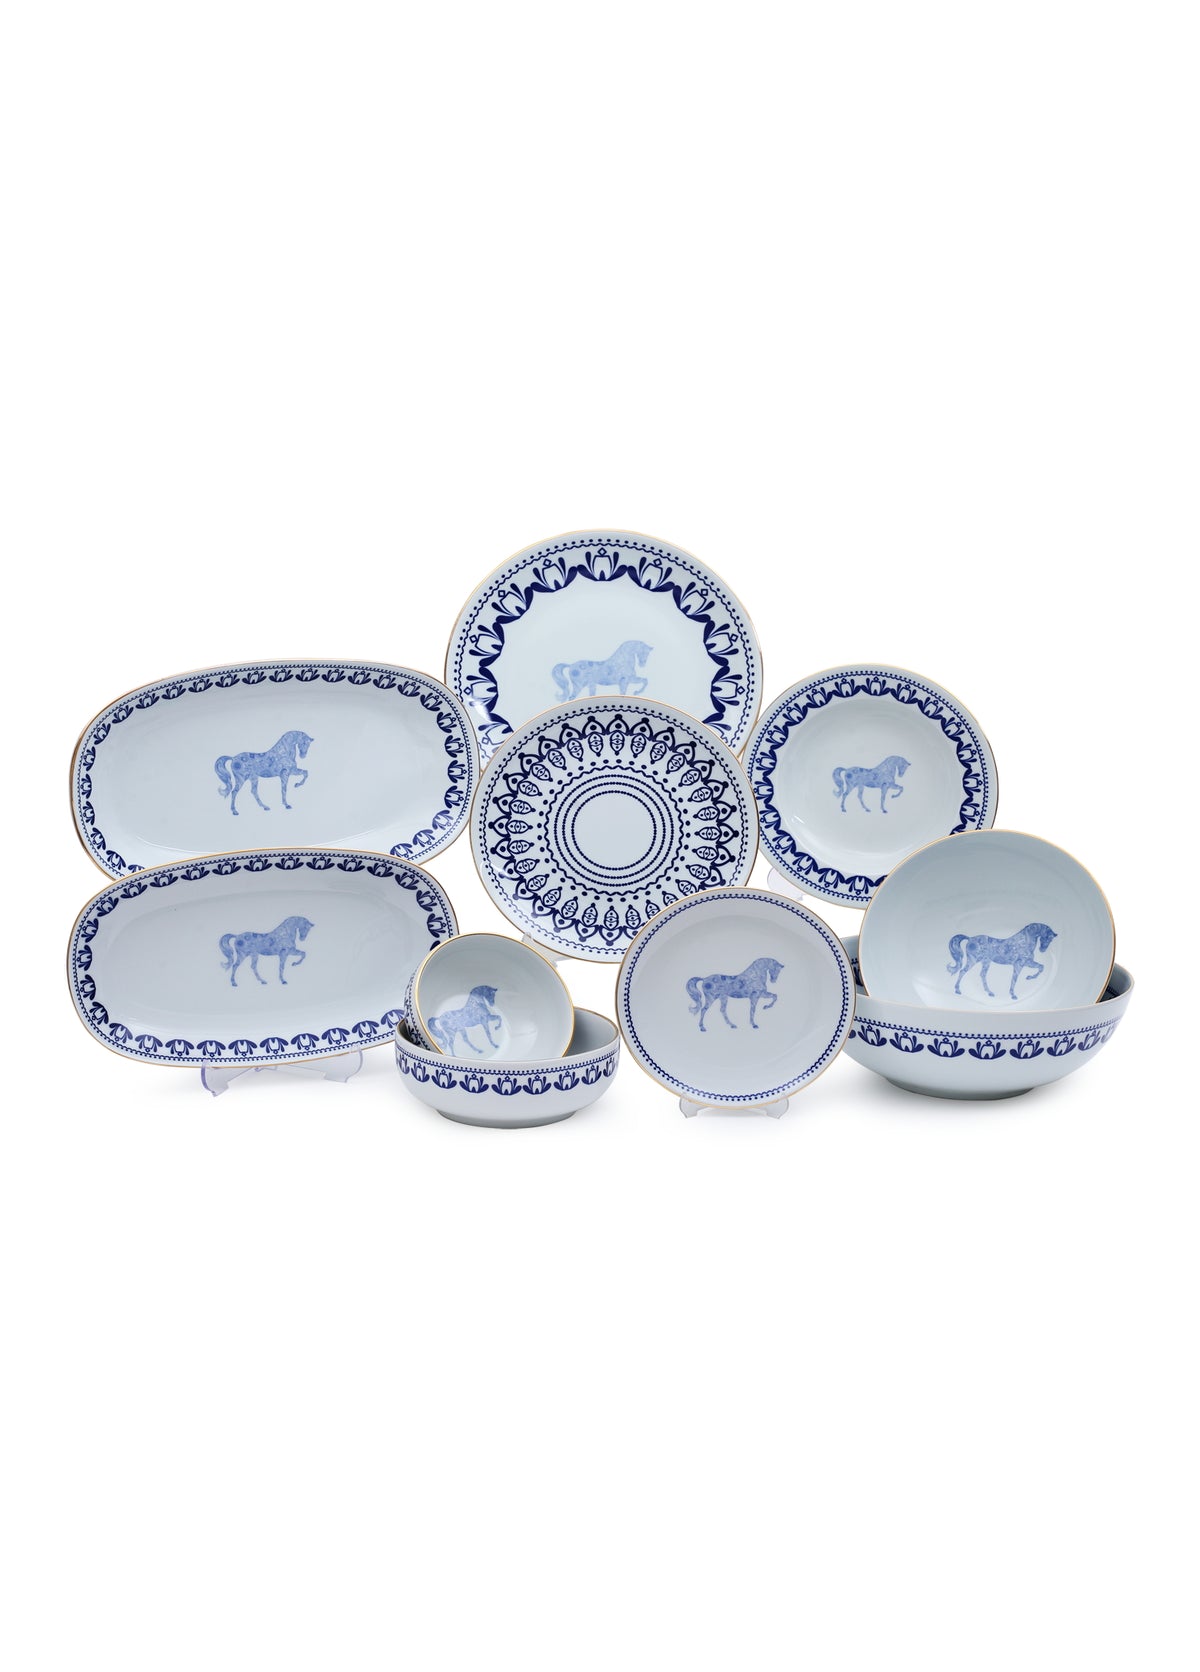 Horse Luck Collection Blue Set of 10 Plates (70 pieces)